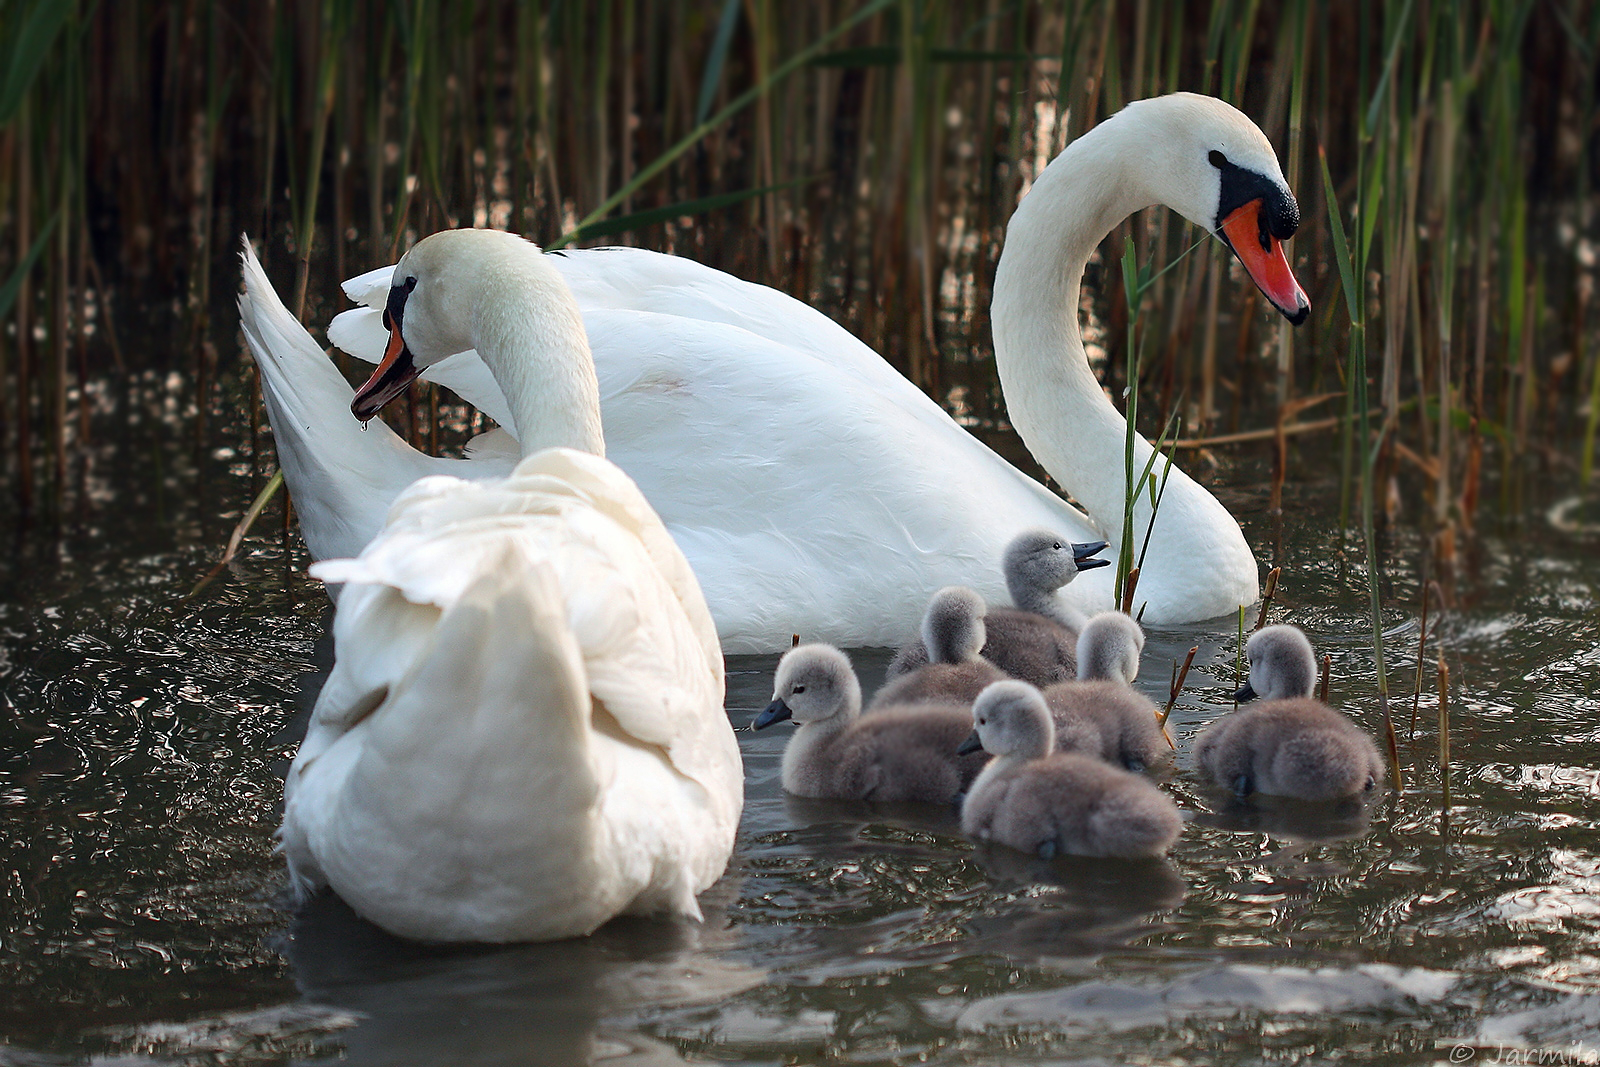 A nice little family of swans...